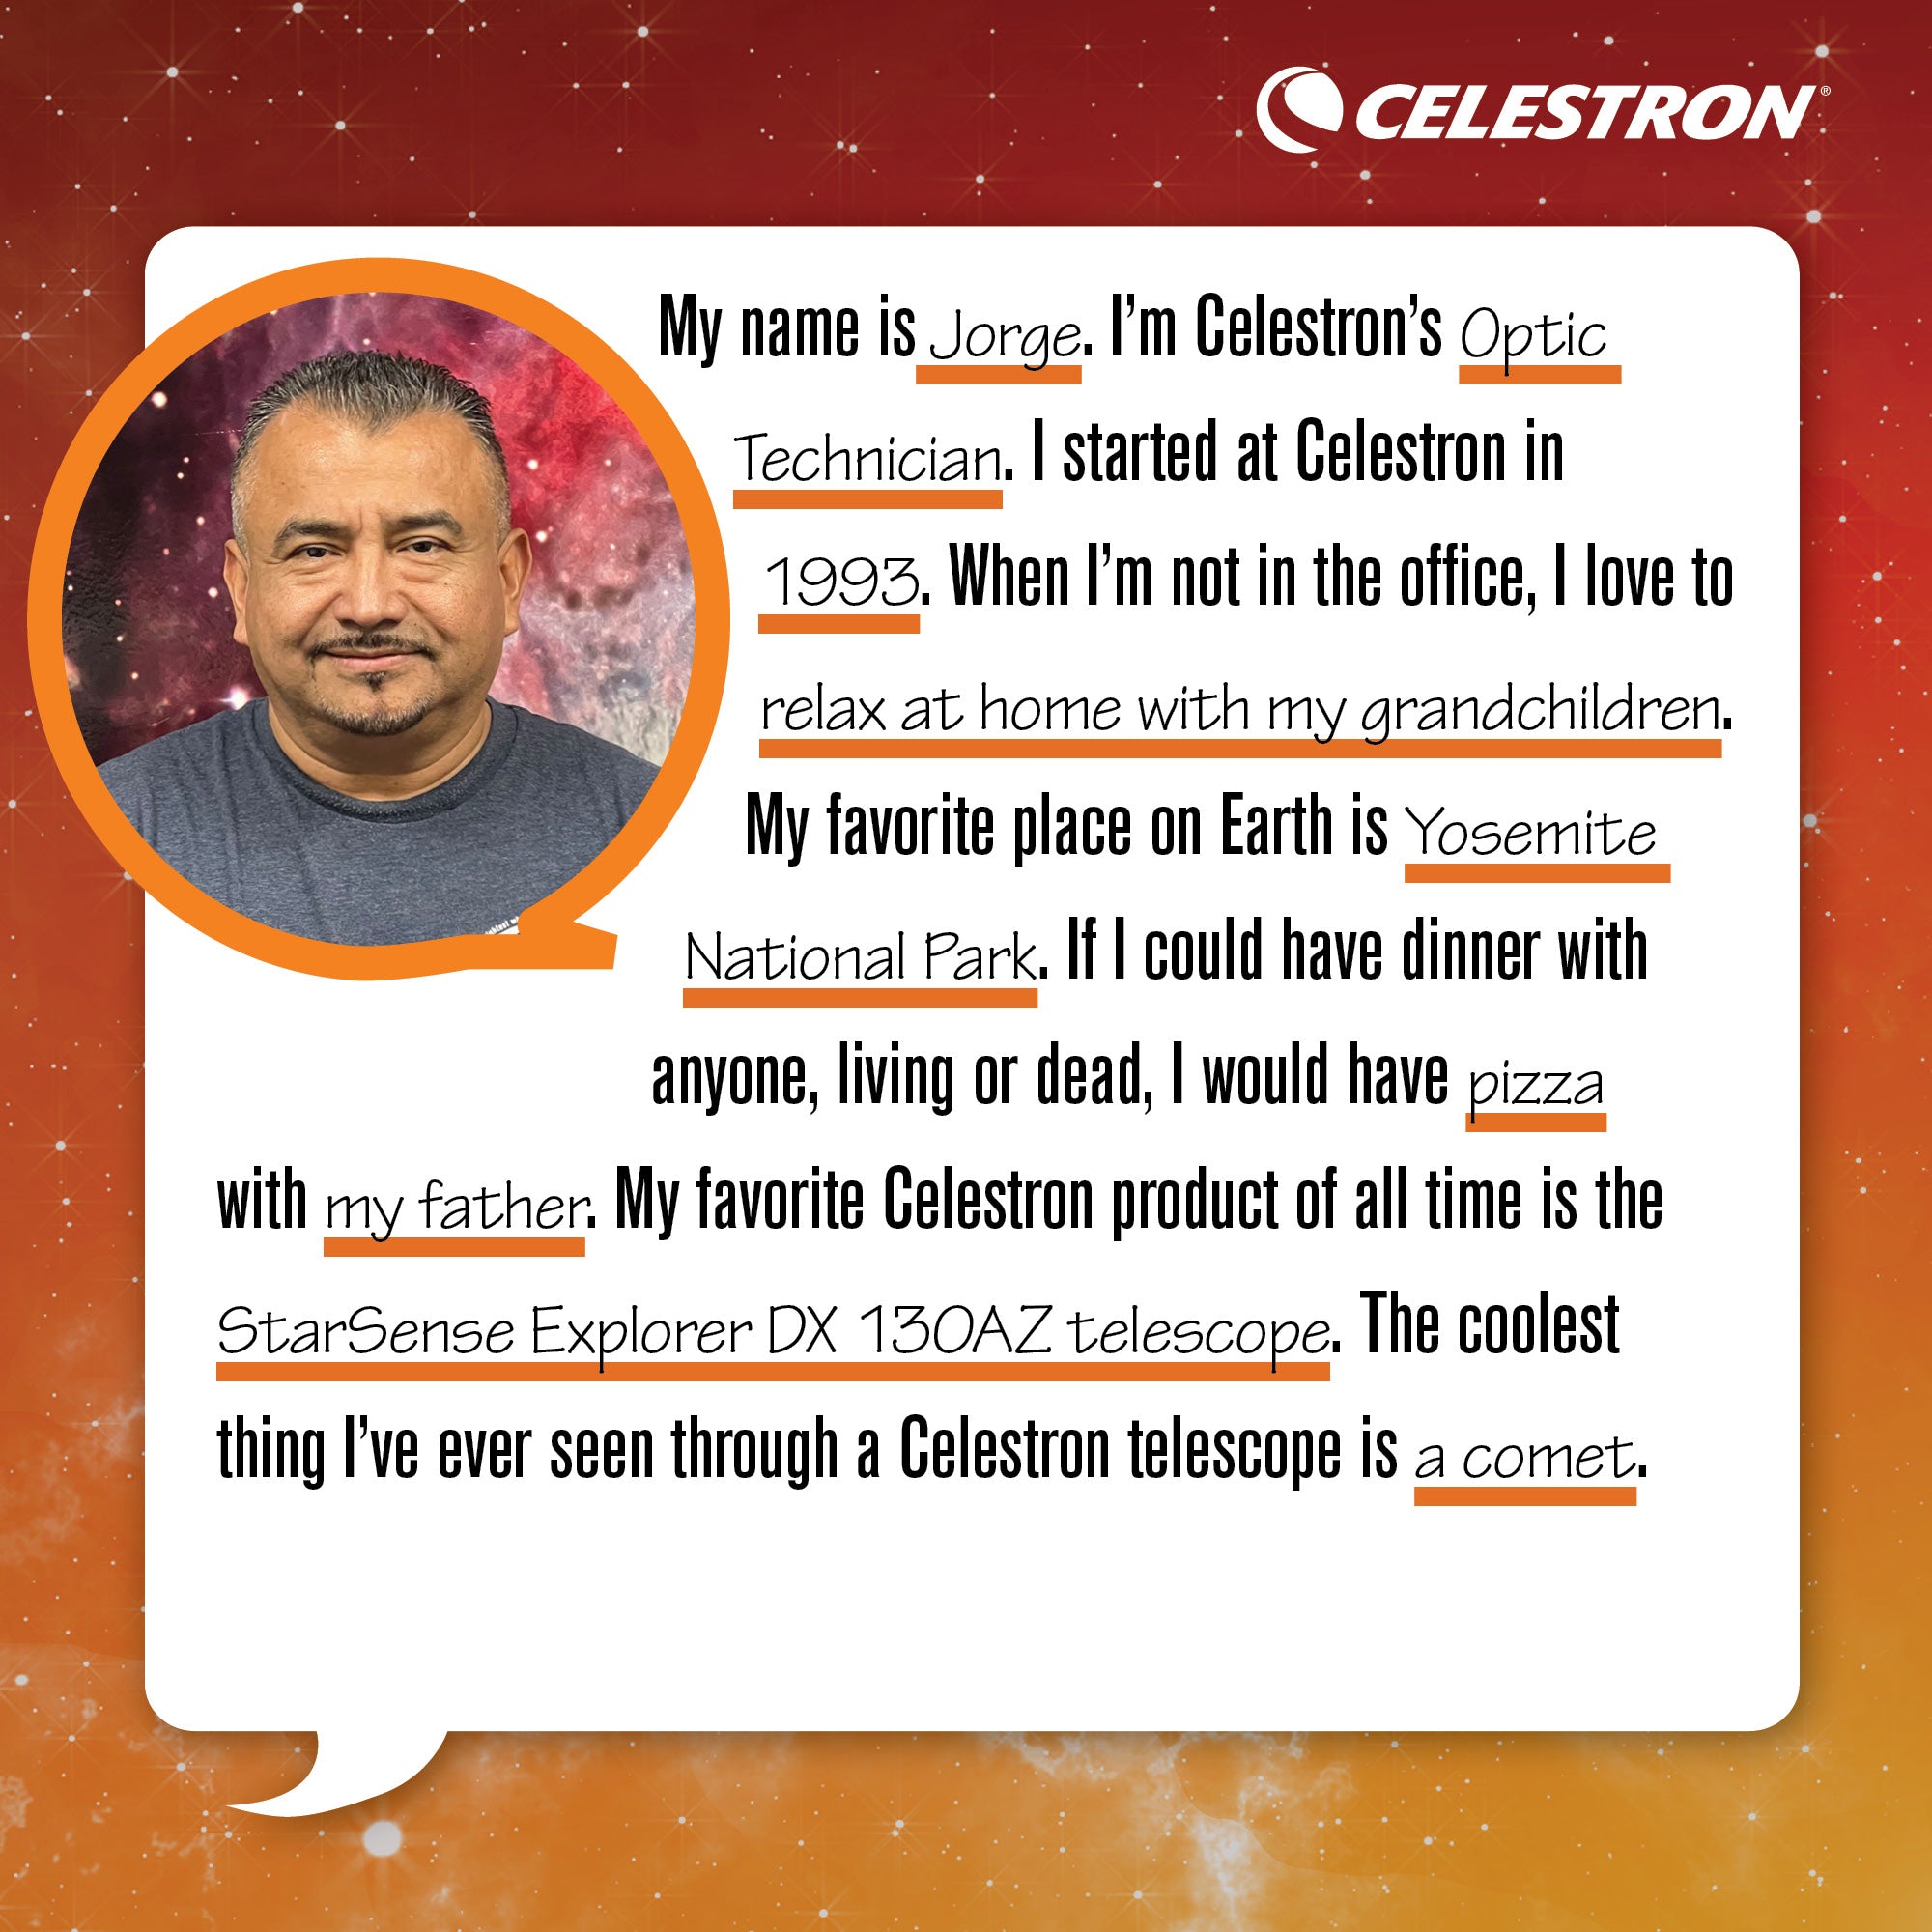 My name is Jorge. I'm Celestron's Optic Technician. I started at Celestron in 1993. When I'm not in the office, I love to relax at home with my grandchildren.  My favorite place on Earth is Yosemite National Park. If I could have dinner with anyone, living or dead, I would have pizza with my father. My favorite Celestron product of all time is the StarSense Explorer DX 130AZ telescope. The coolest thing I've ever seen through a Celestron telescope is a comet.